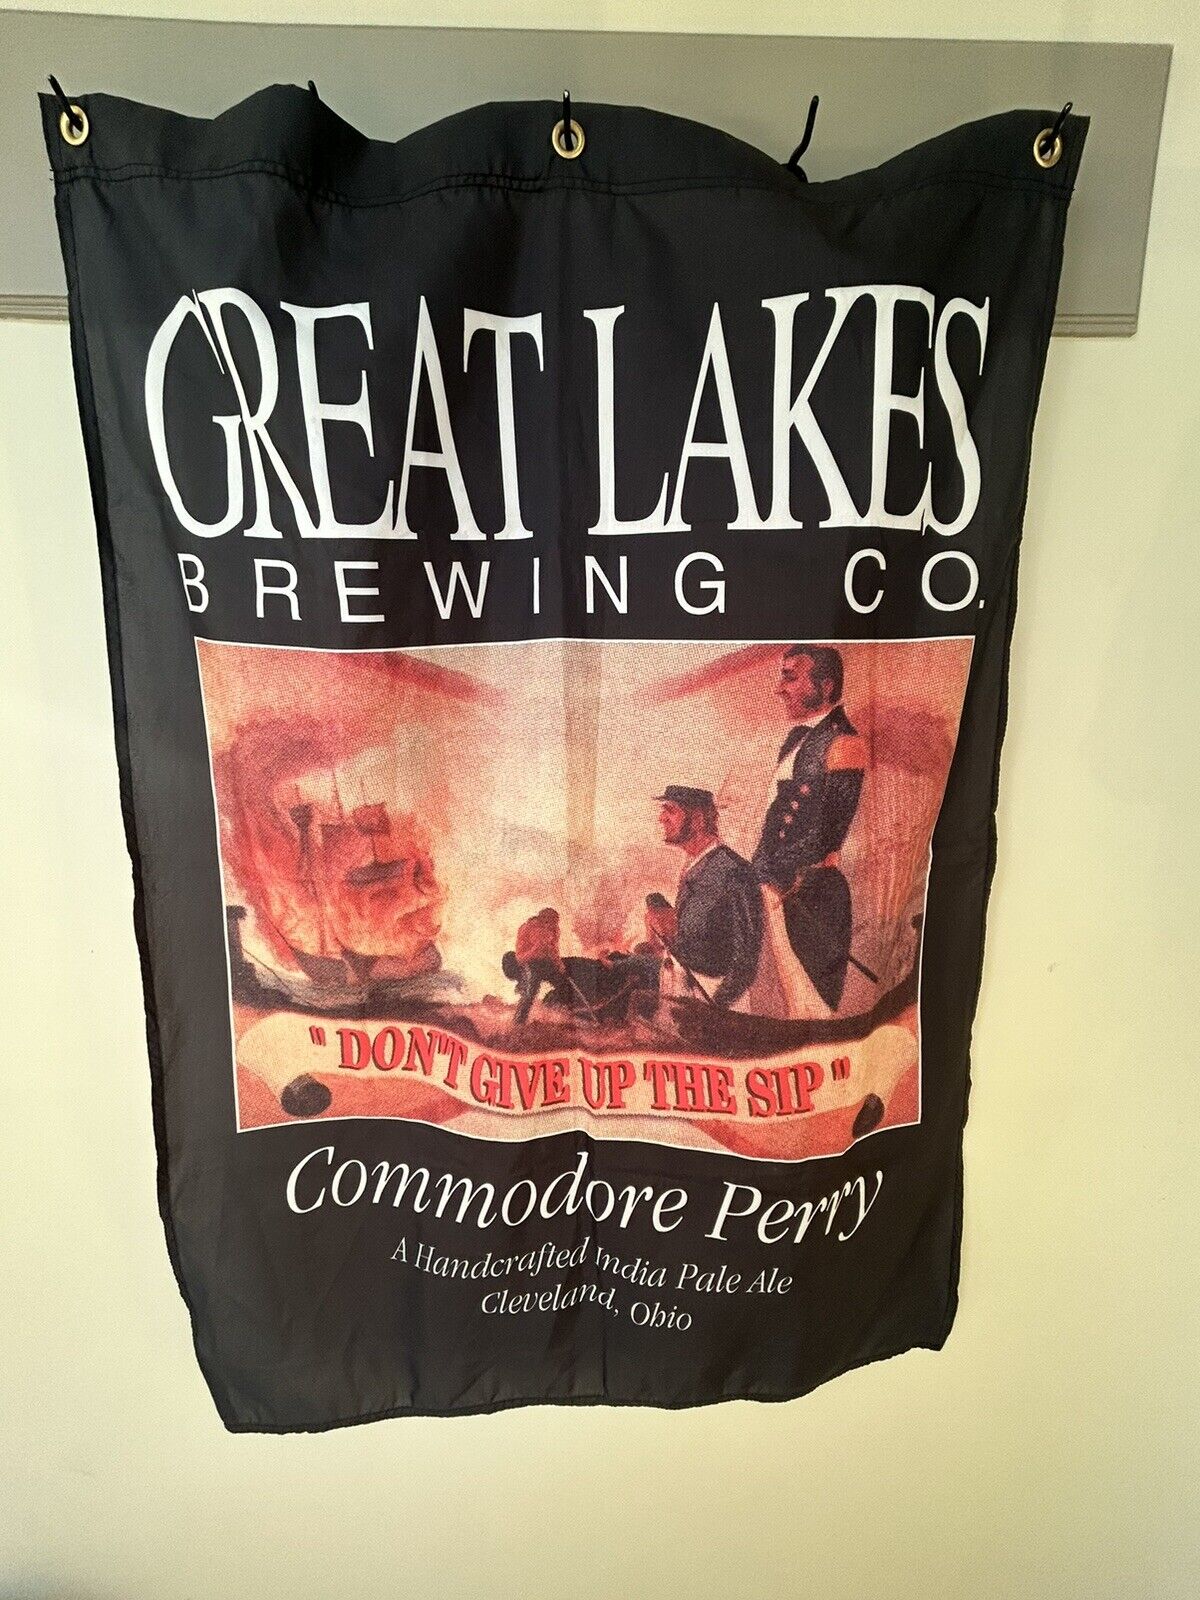 Great Lakes Brewing Company Commodore Perry Wall Hanging Flag Banner  42”x30”